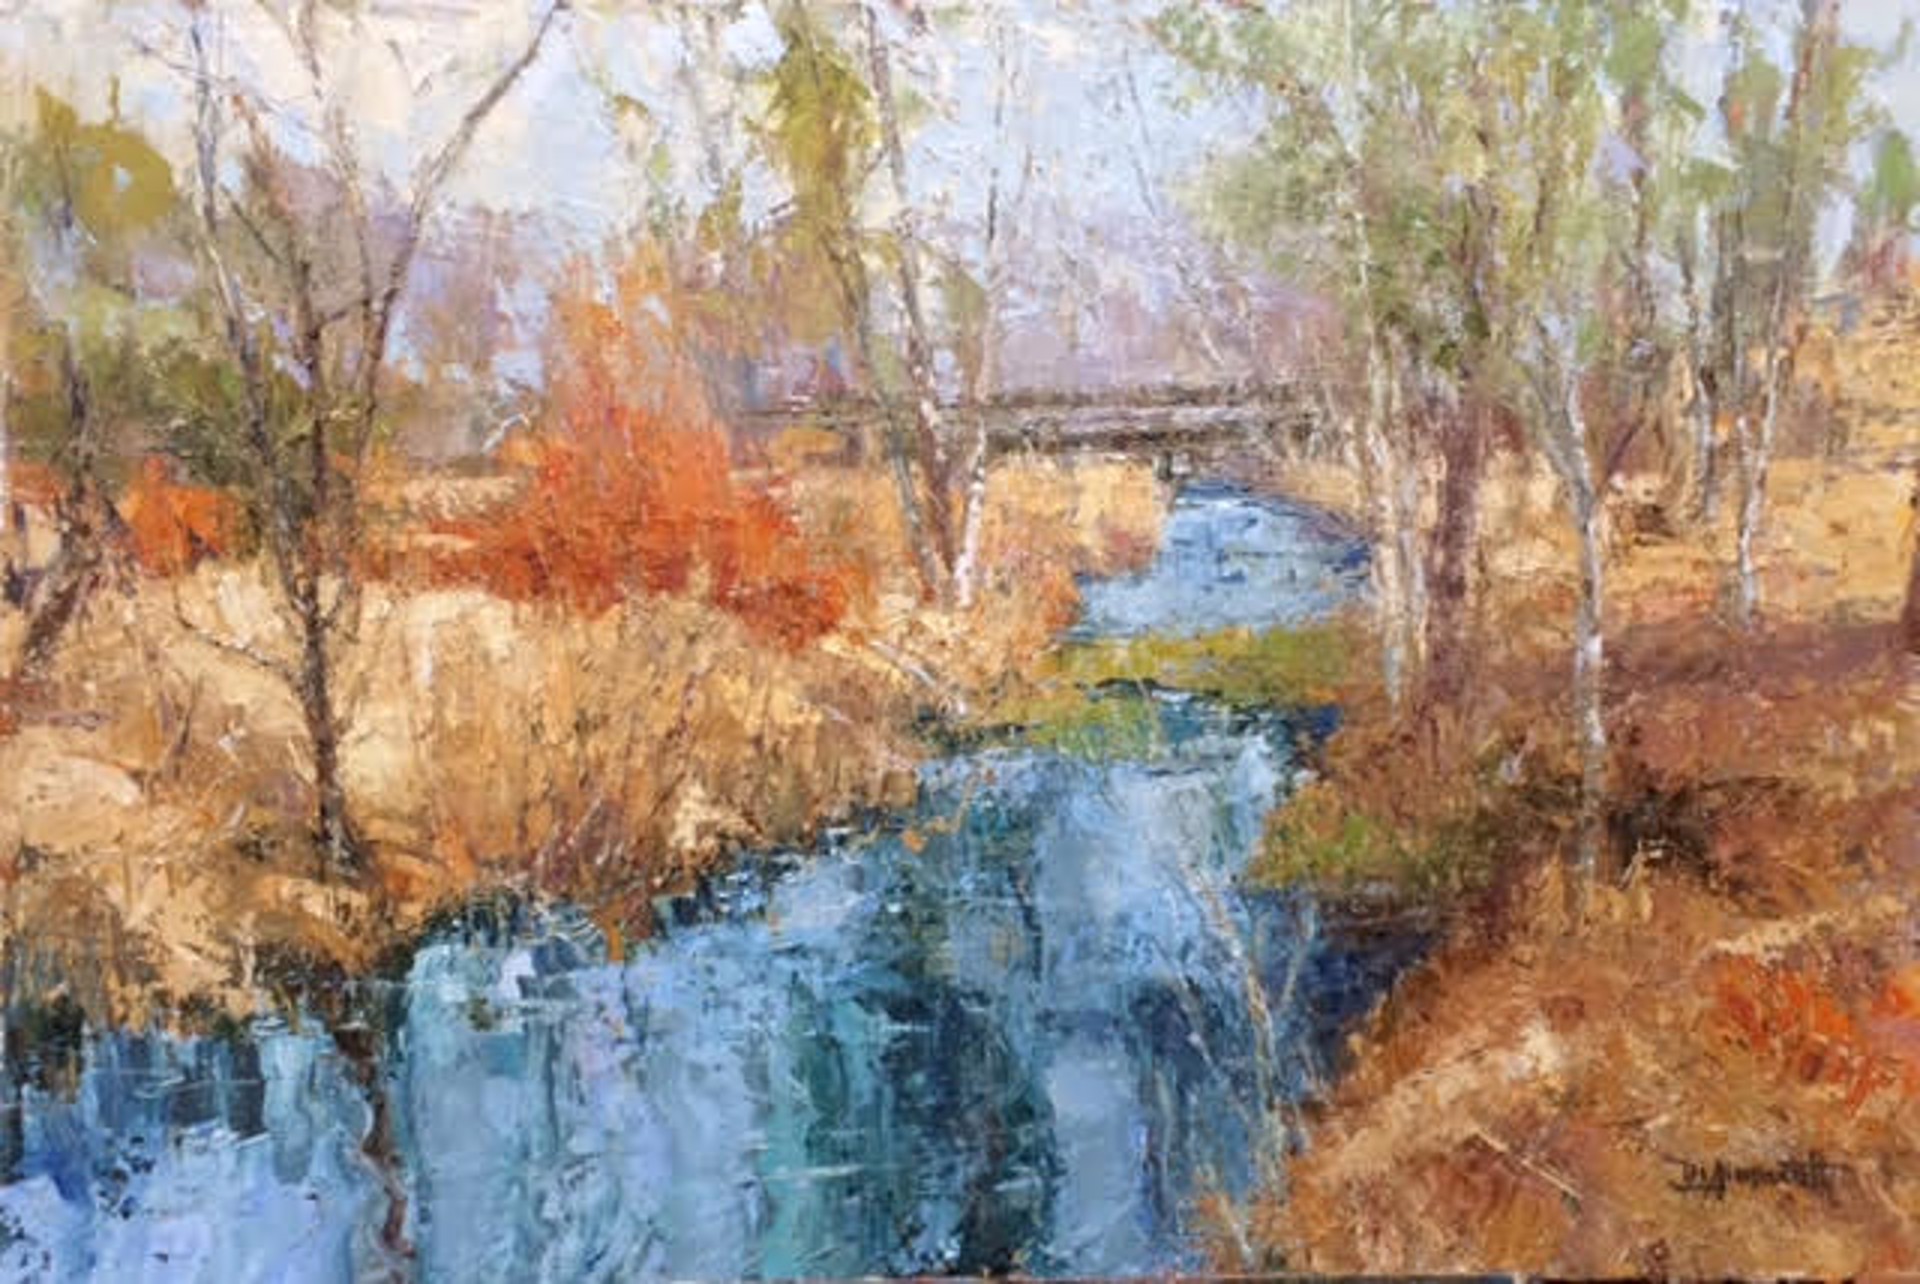 Bridge Over Sweetwater Creek by Diane Ainsworth